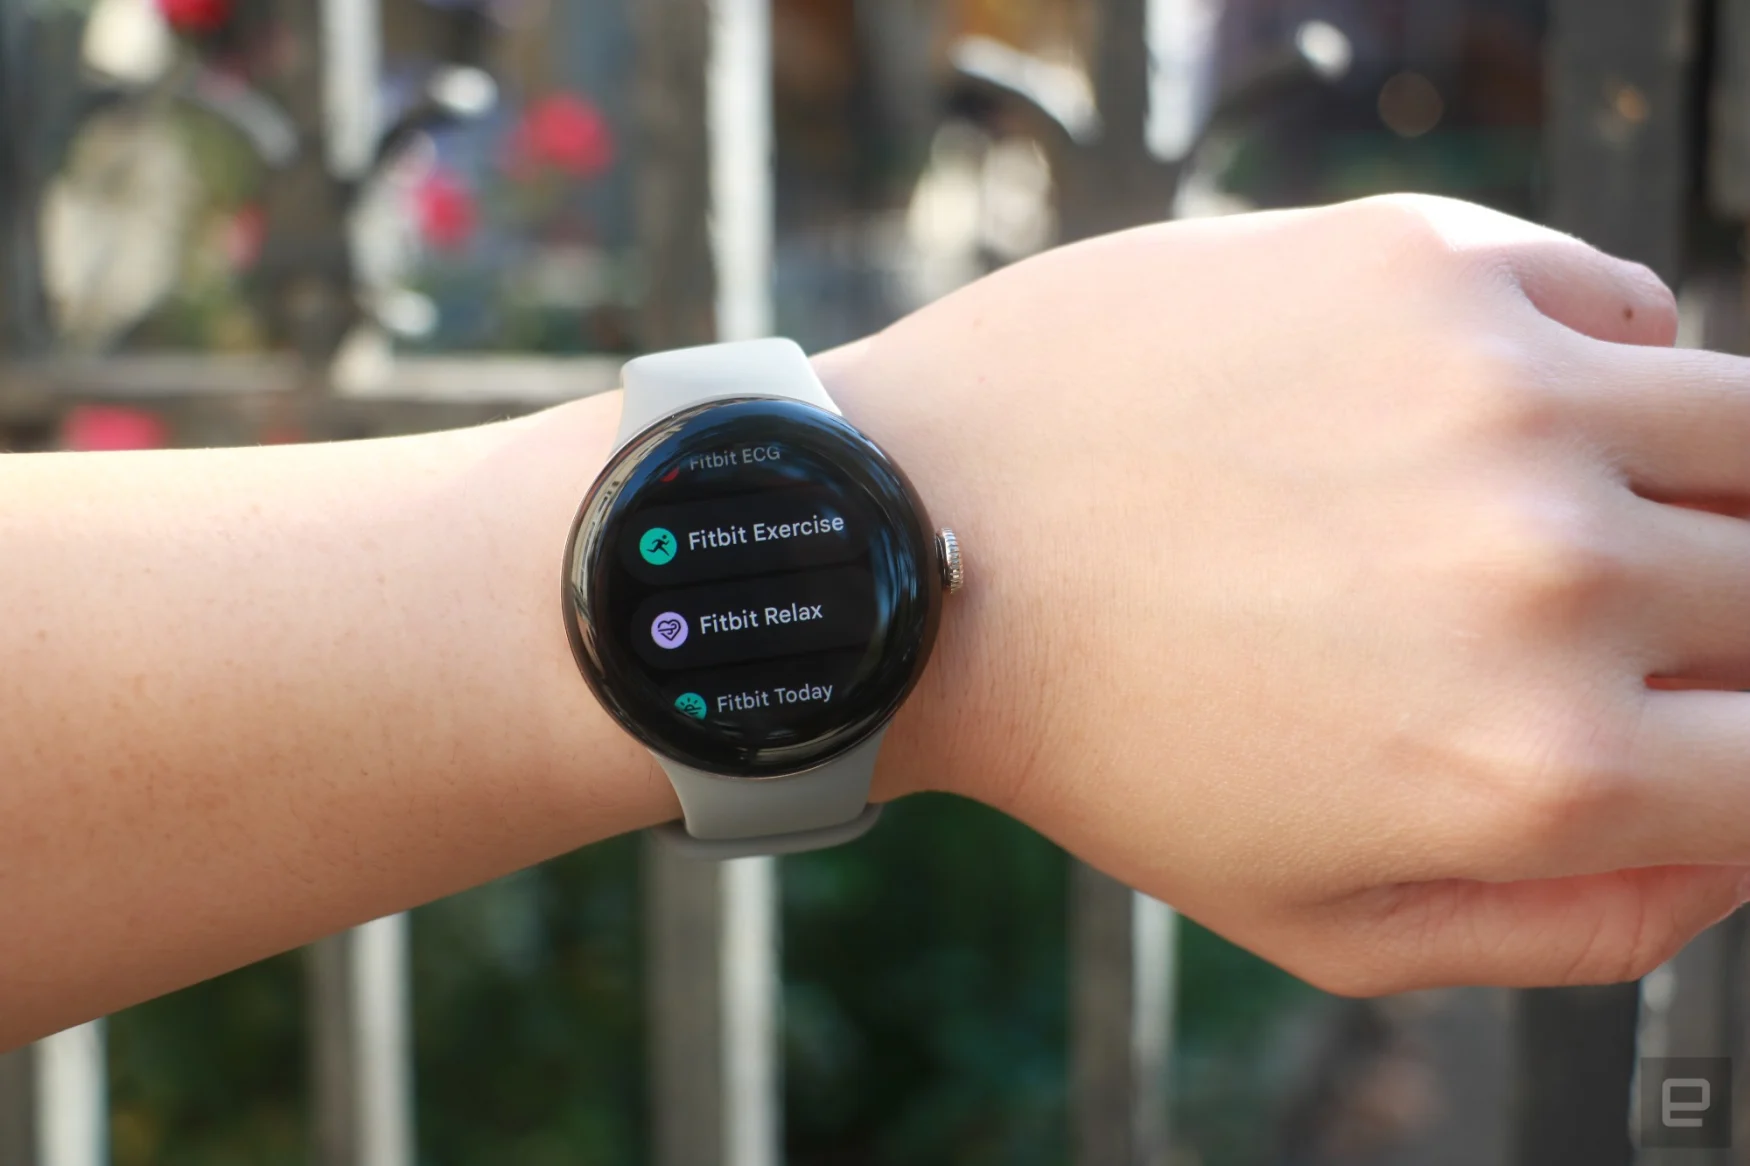 The Pixel Watch 2 on a person's wrist, showing a list of Fitbit apps. From top to bottom, they are Fitbit ECG, Fitbit Exercise, Fitbit Relax and Fitbit Today.